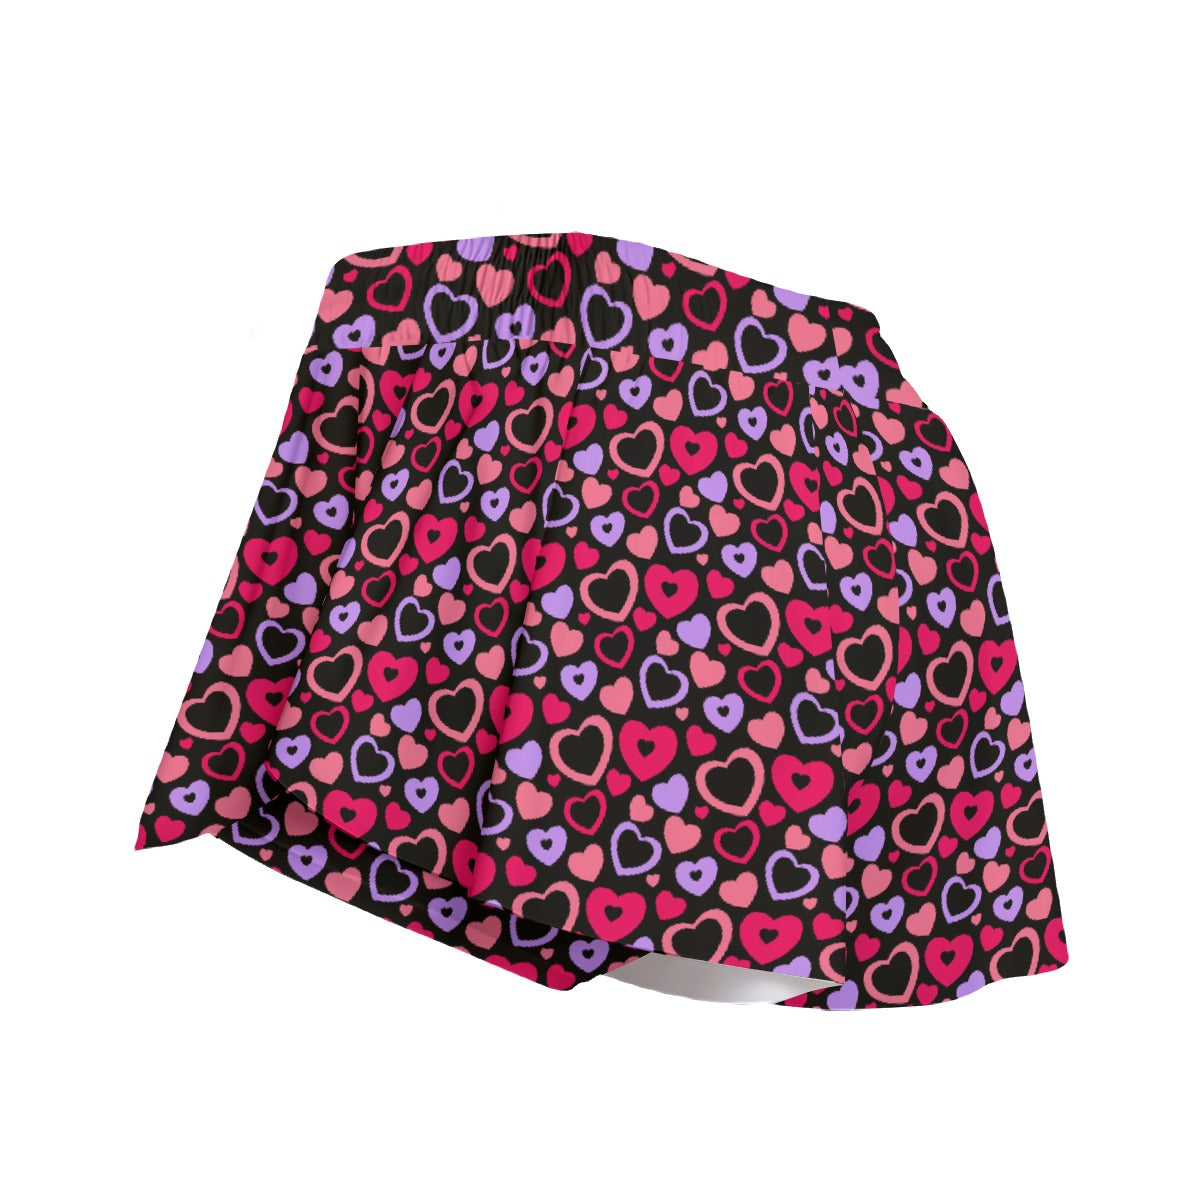 Printed Athletic Skort with Pocket - Hollow Hearts